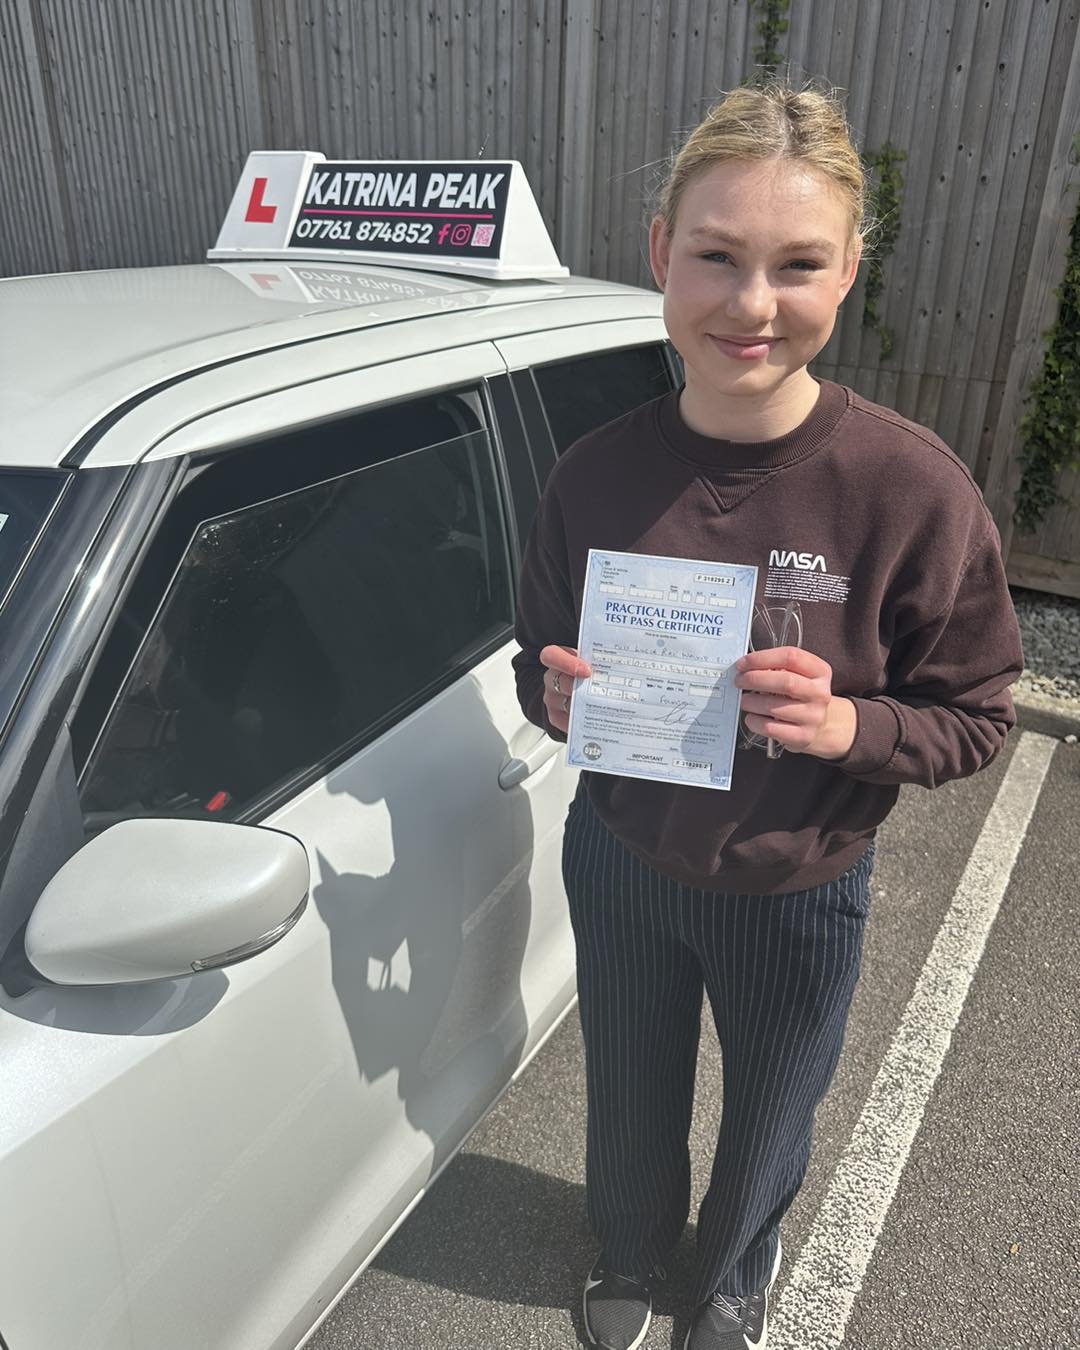 Amazing driving from Lucy this morning in sunny Folkestone! ☀️ Congratulations on passing your driving test, so thoroughly well deserved! I&rsquo;ll miss our driving lessons but keep in touch and I look forward to seeing you on the road! 🥳🎉🚗🚙 #le